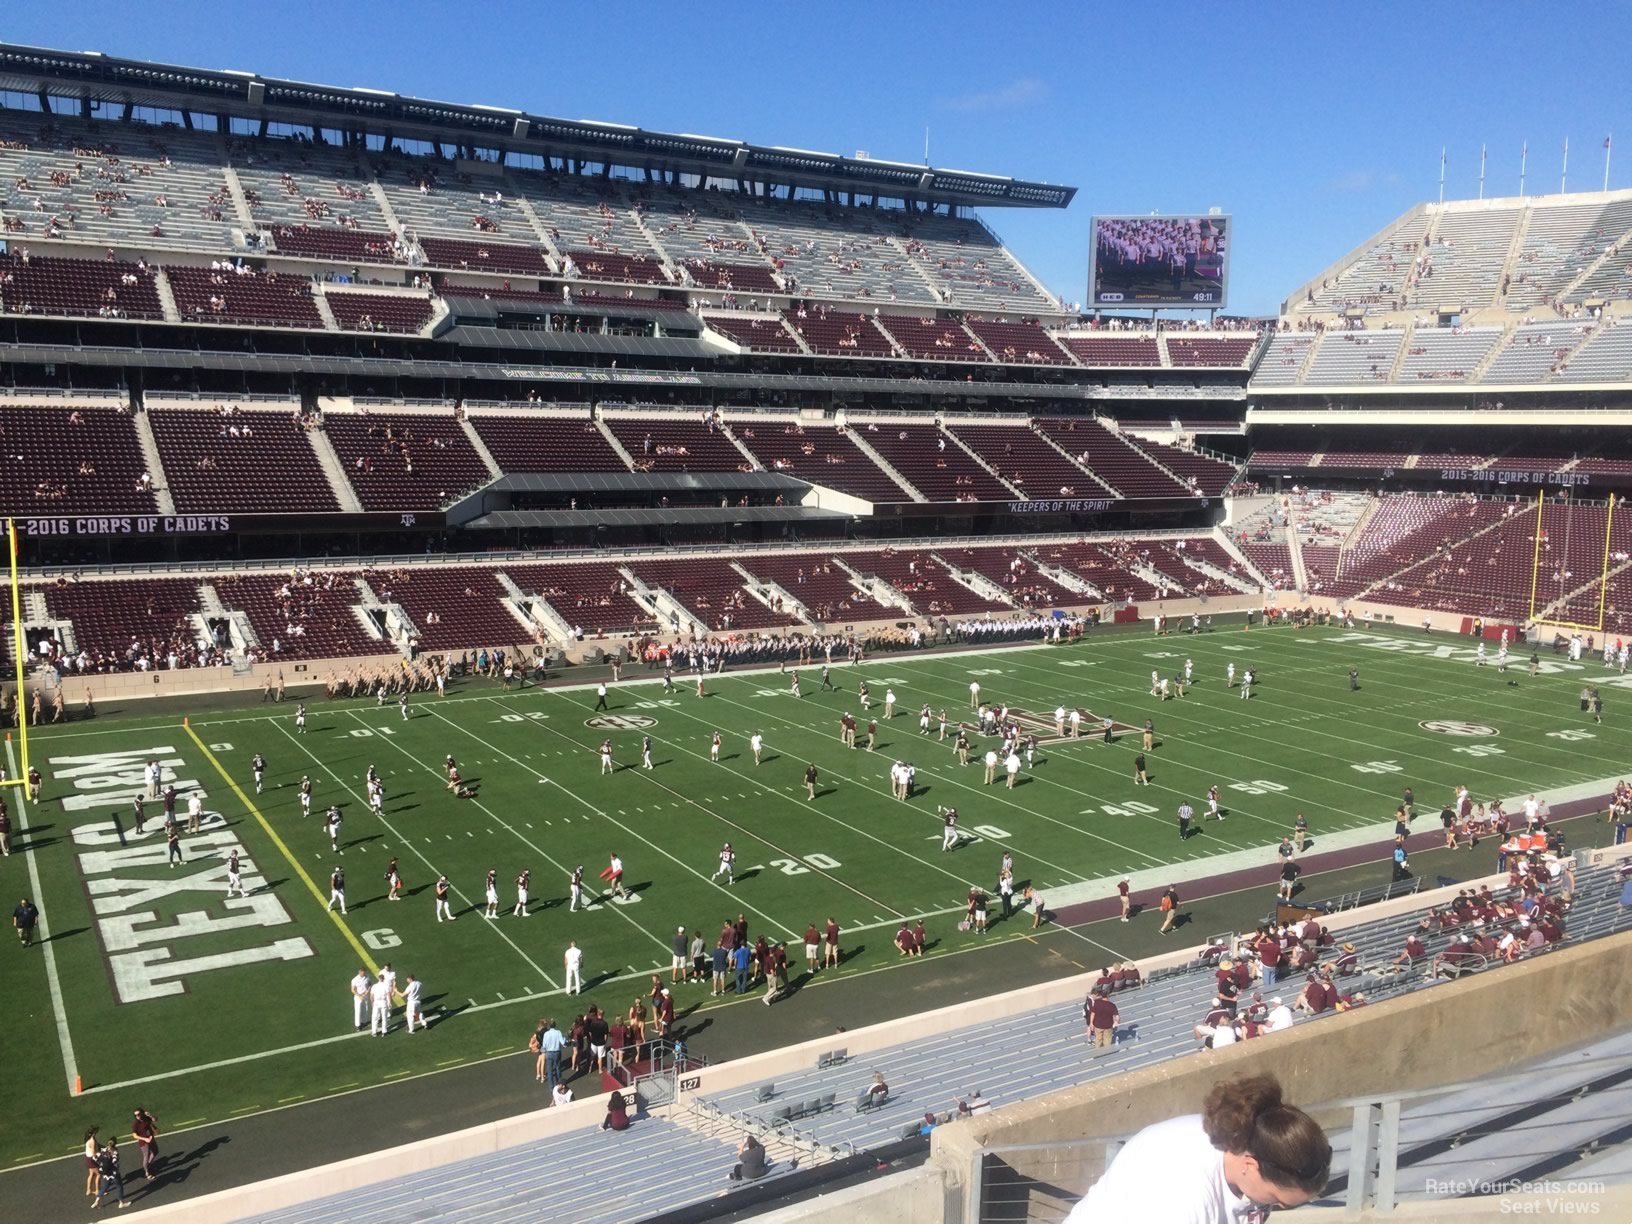 section 239, row 7 seat view  - kyle field